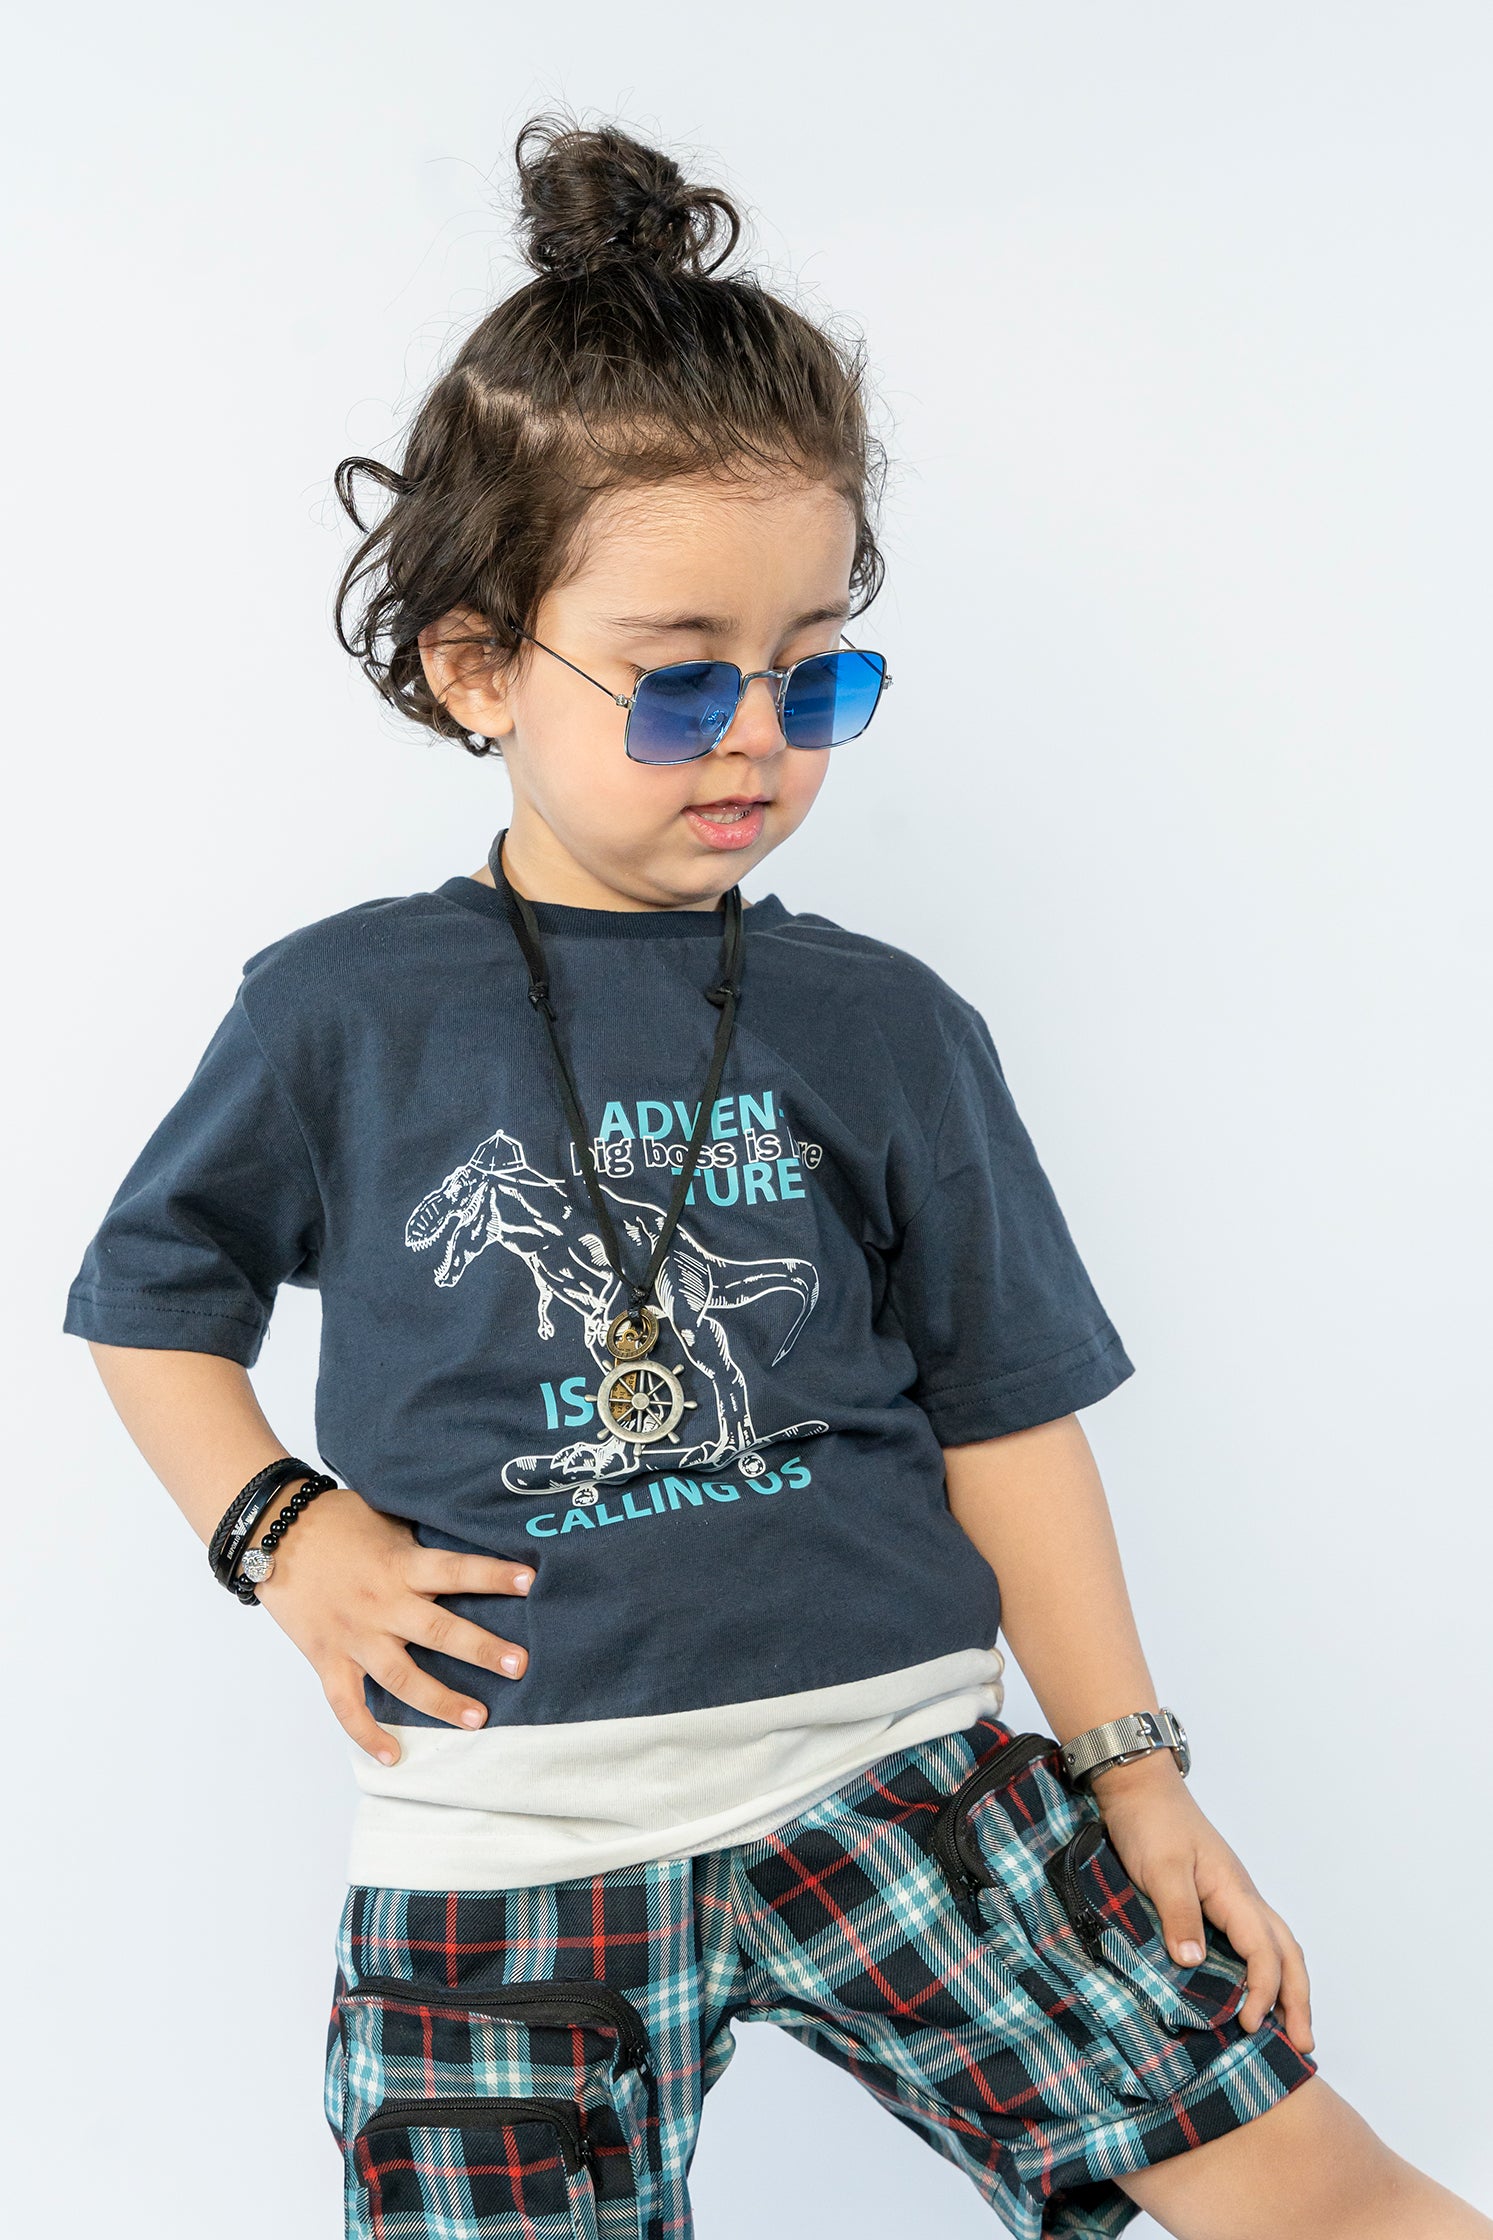 KIDS T-SHIRTS NAVY WITH FRONT "ADVENTURE" PRINTING